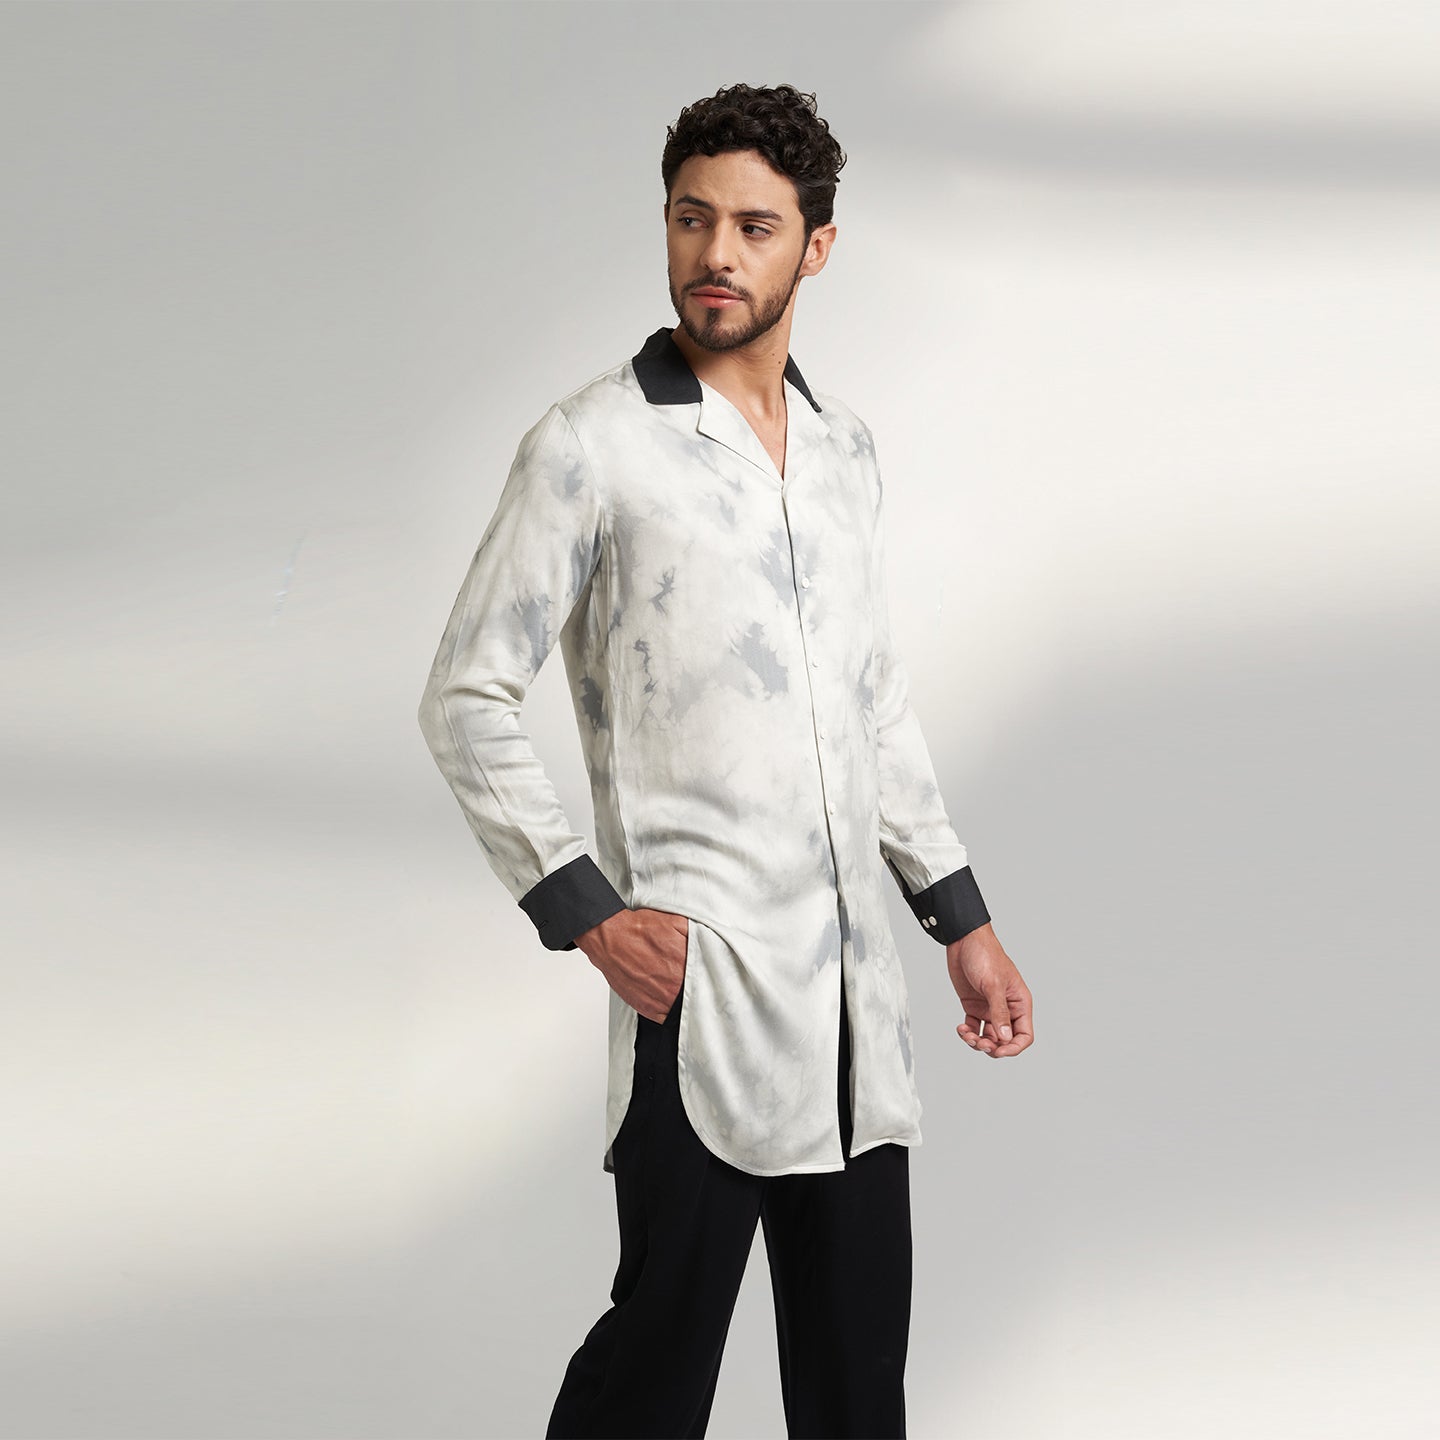 A medium-sized model showcases a Long Printed Cuban Collar shirt in organic Lotus Stem fabric, featuring a solid black collar and cuffs. Paired seamlessly with black trousers made from the same organic lotus stem fabric, presenting a stylish side pose.